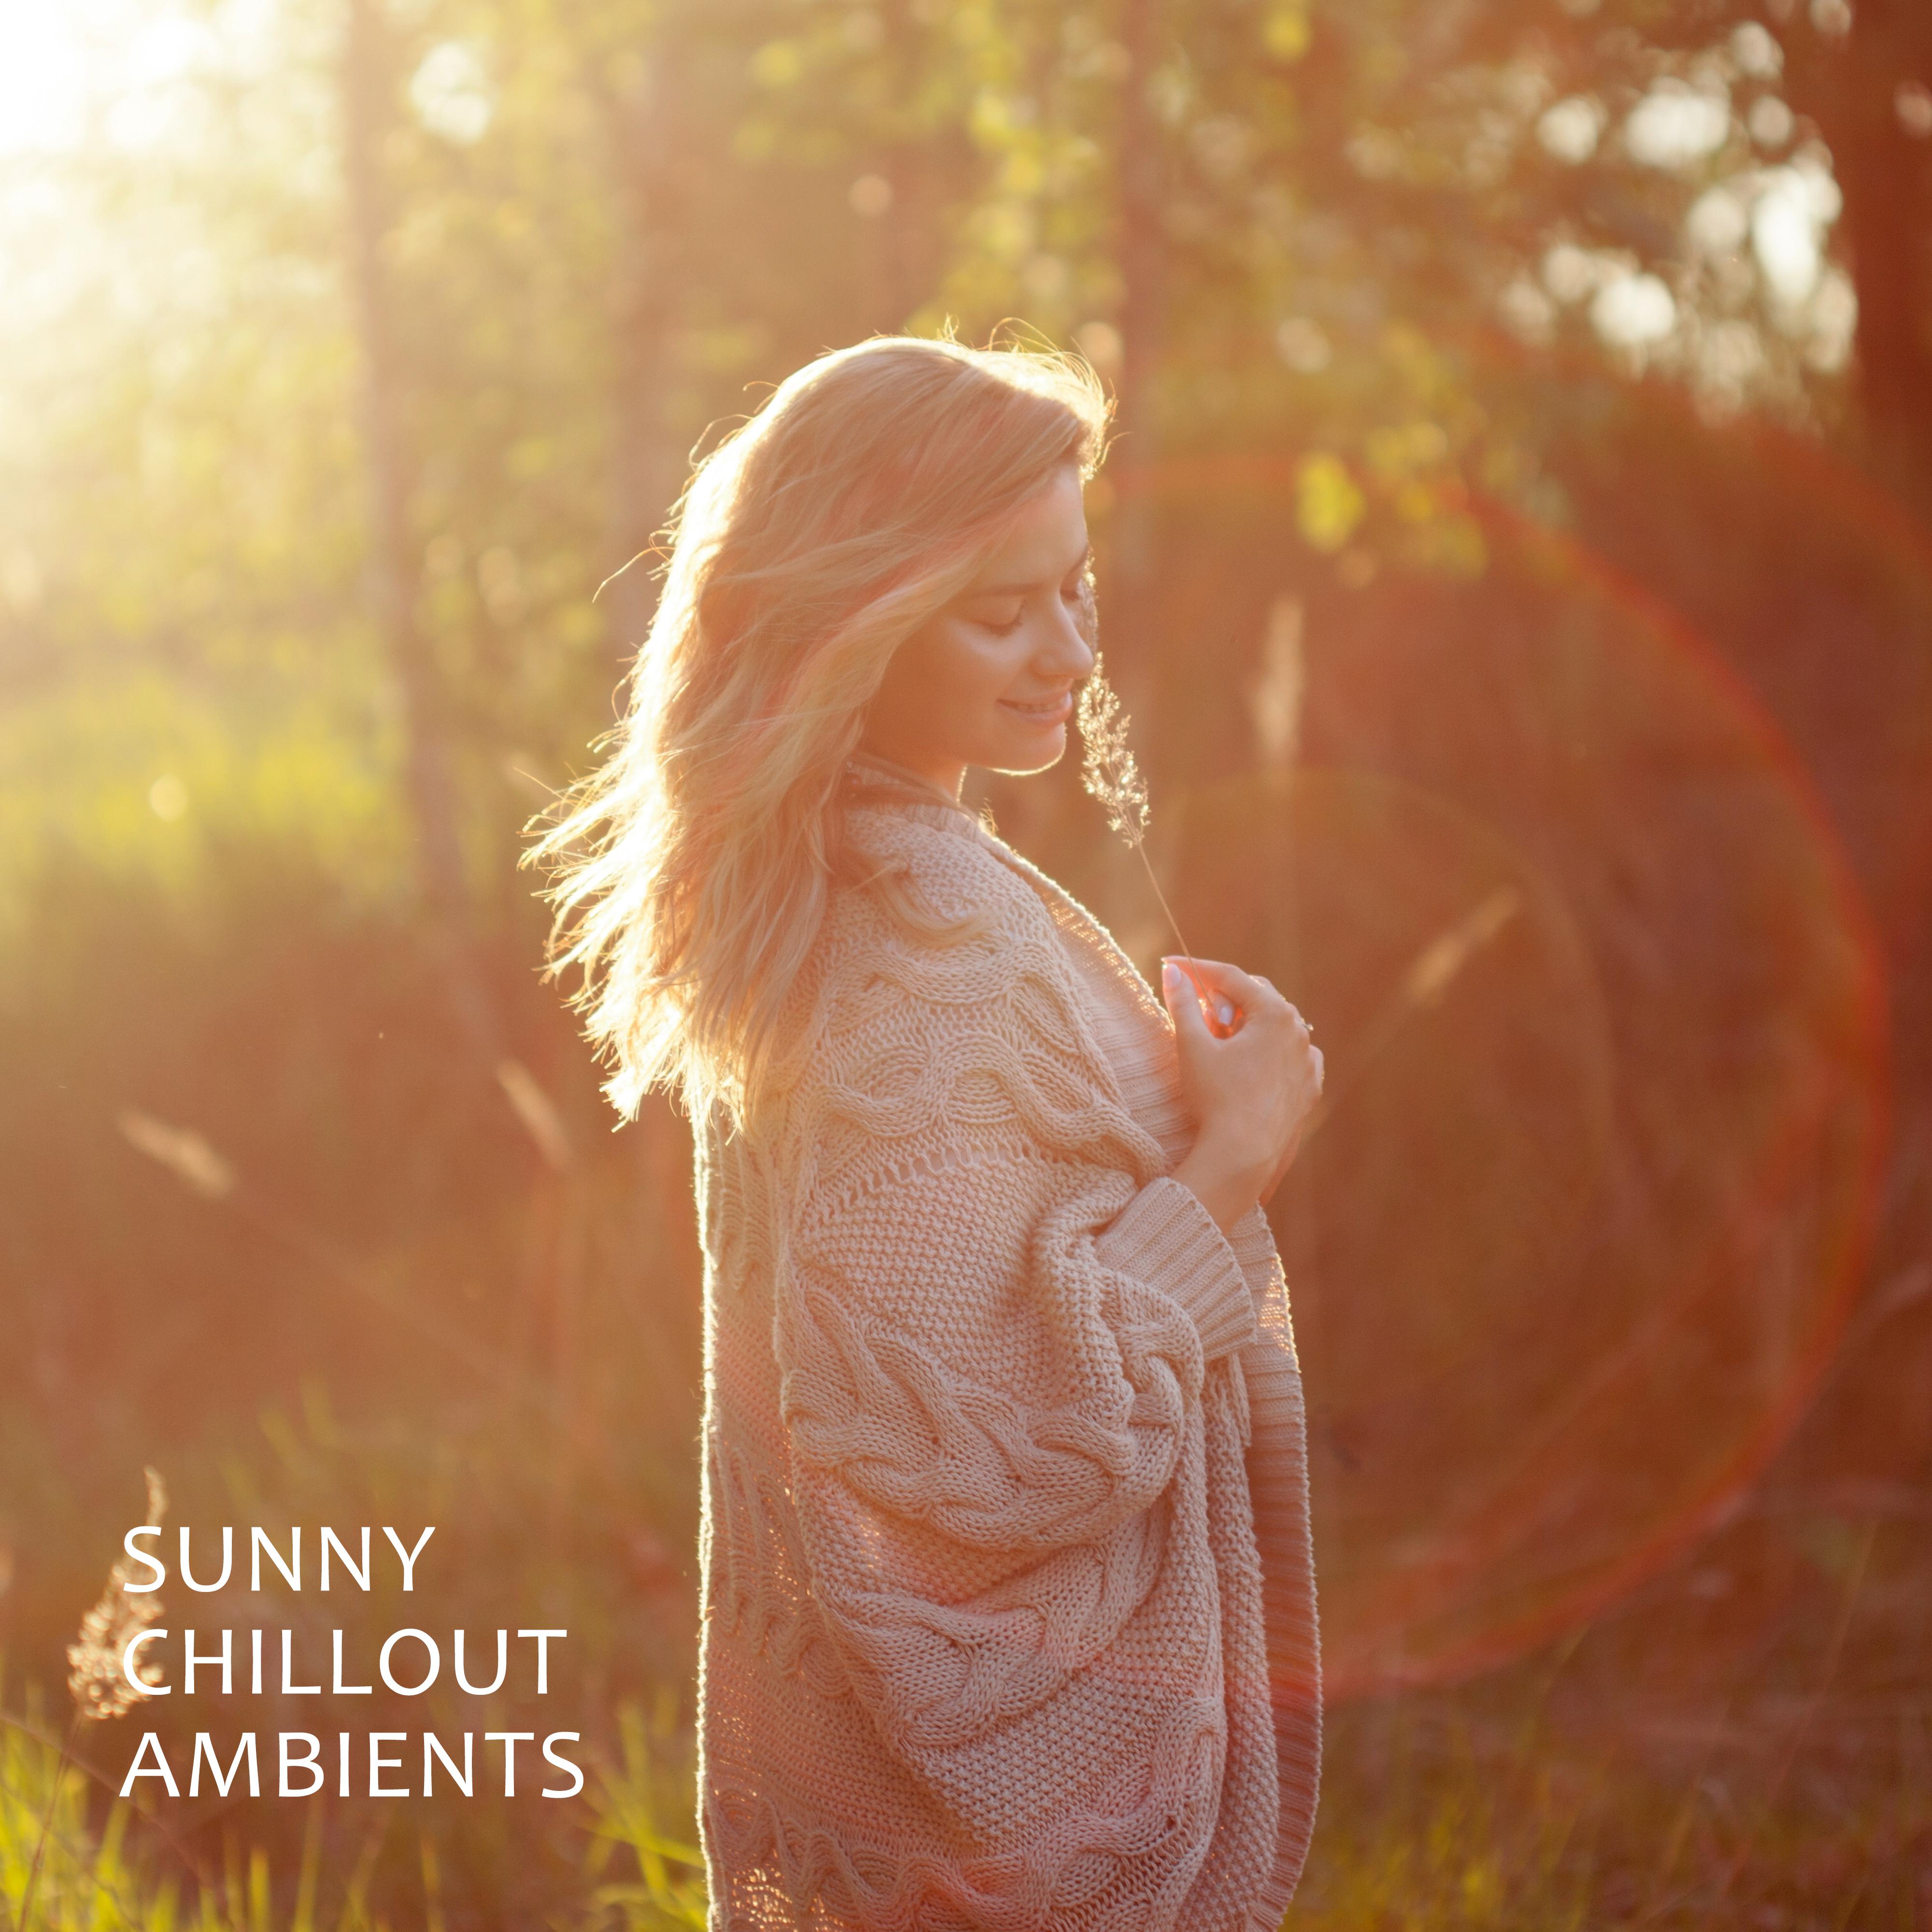 Sunny Chillout Ambients: 2019 Electronic Slow Chill Out Melodies, Deep Music for Best Relaxation & Sunny Day Celebration, Baleraric Lounge Sounds